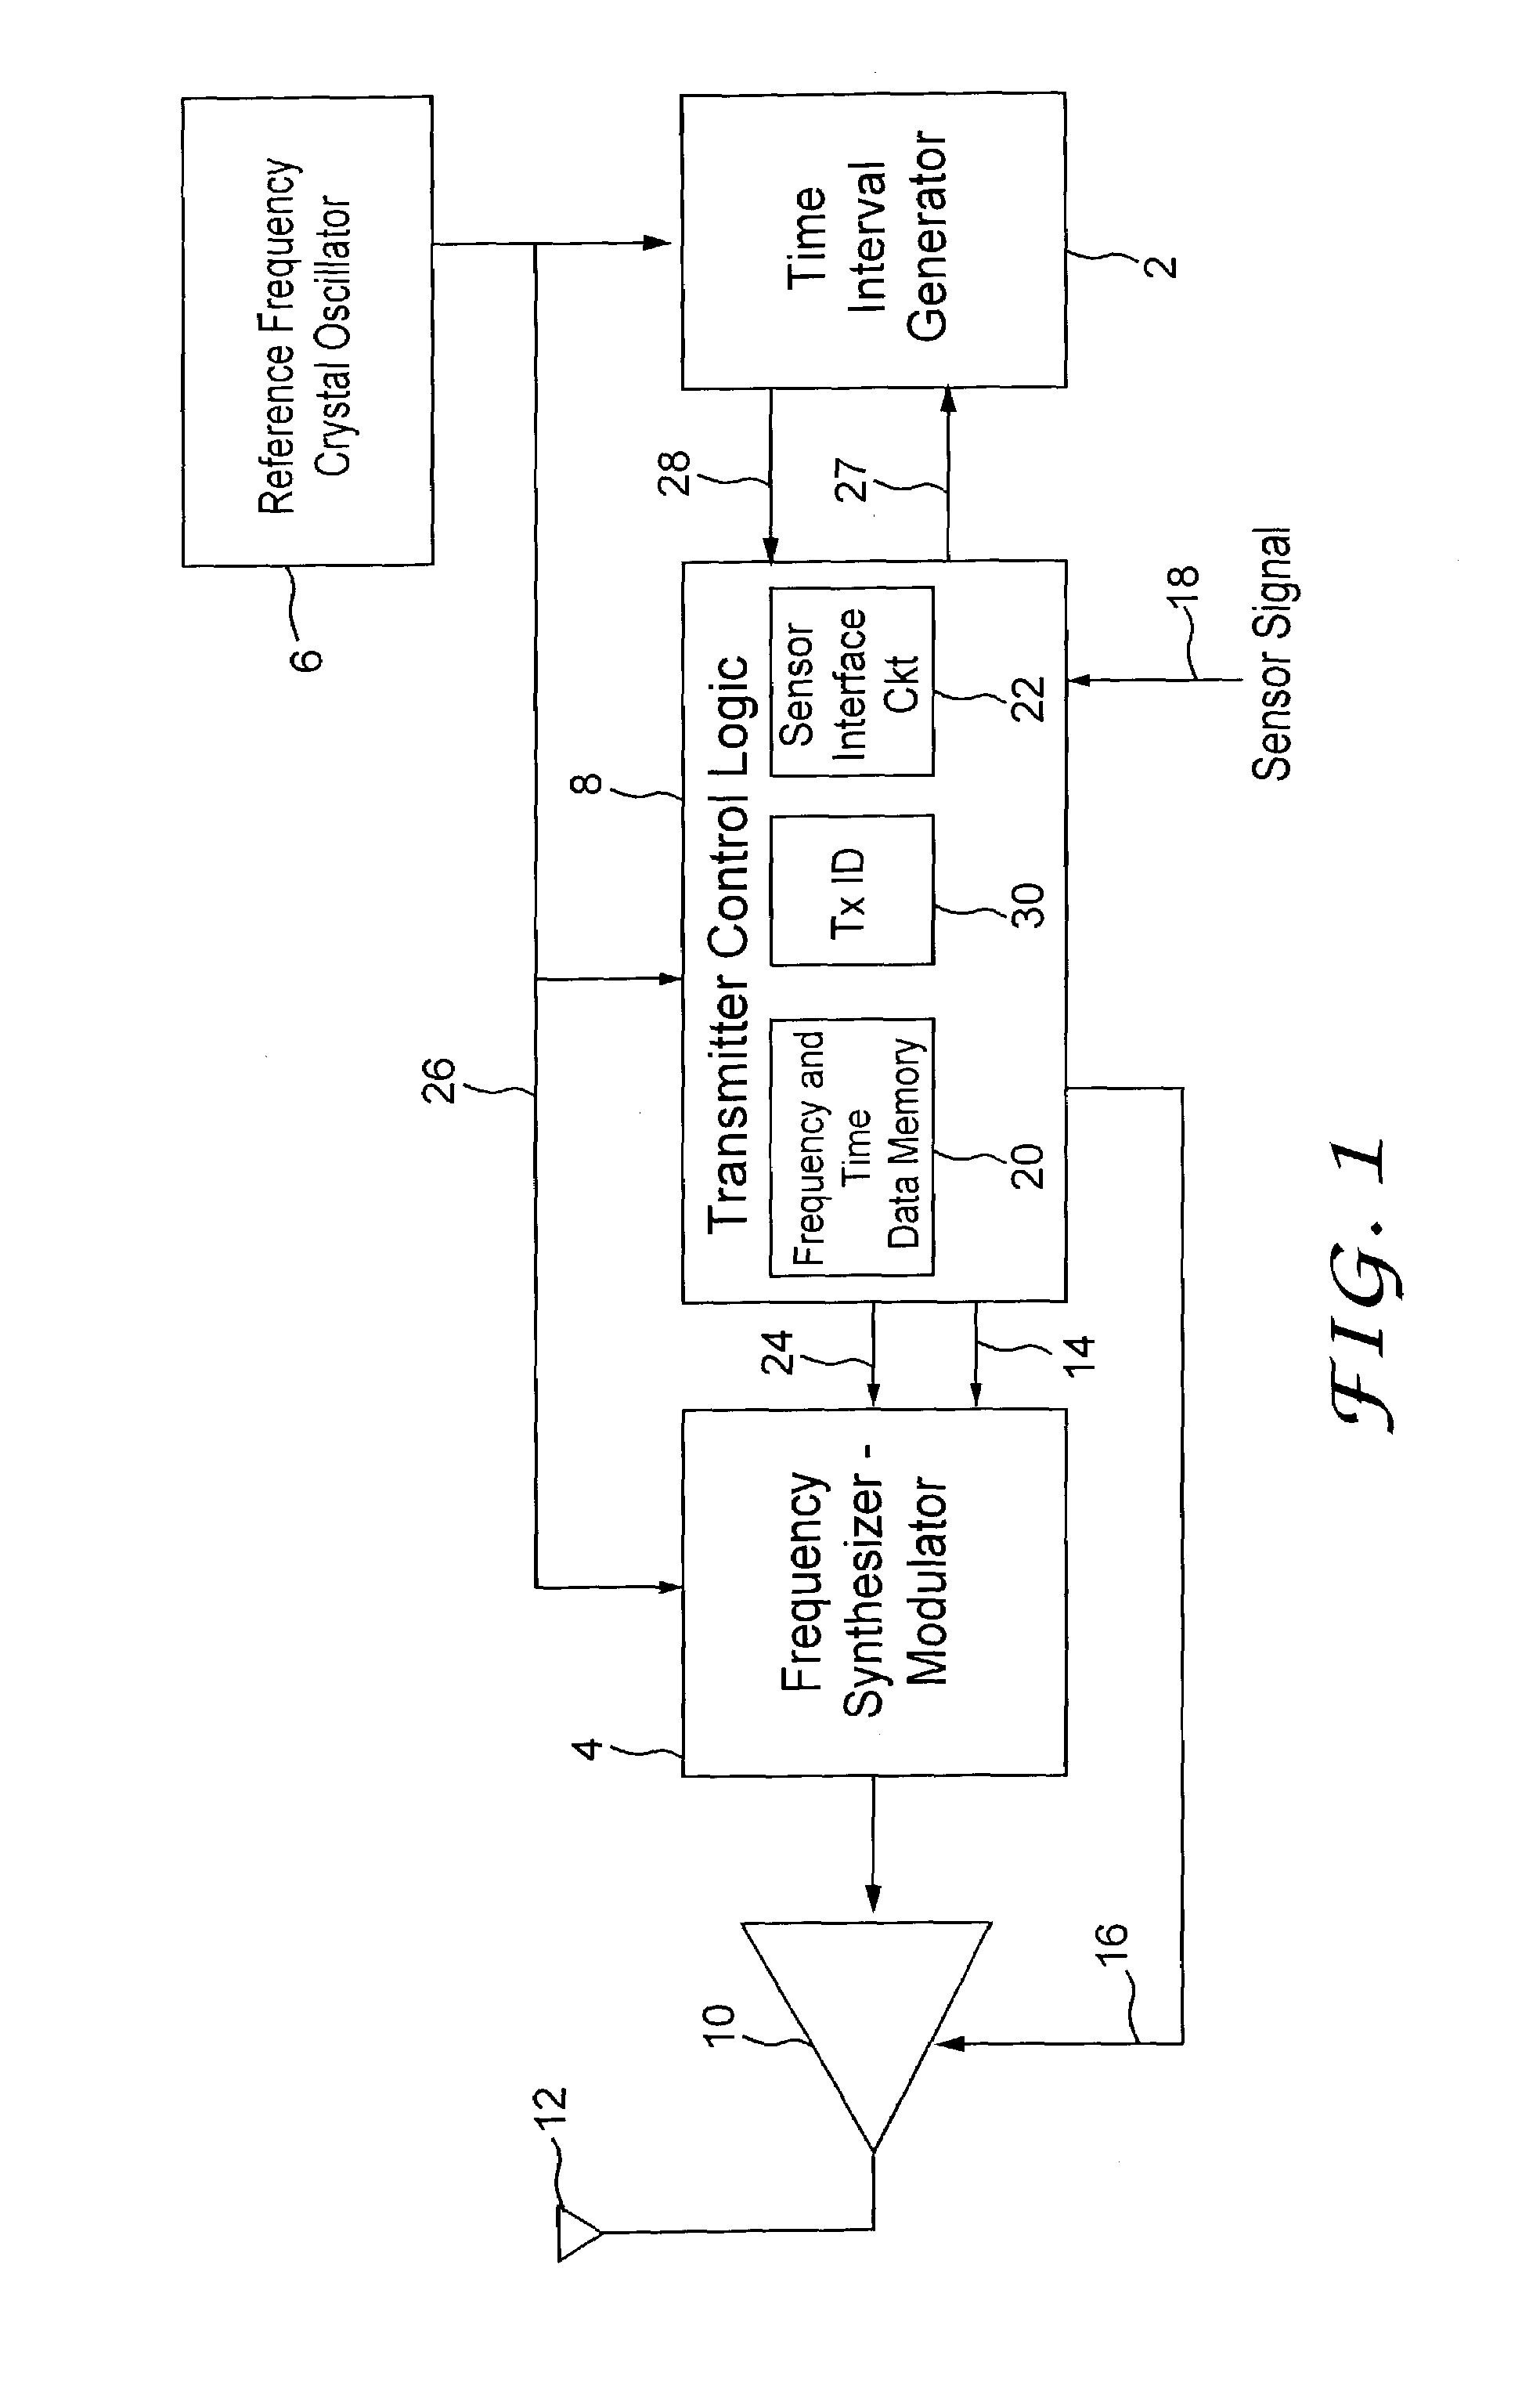 Frequency hopping system for intermittent transmission